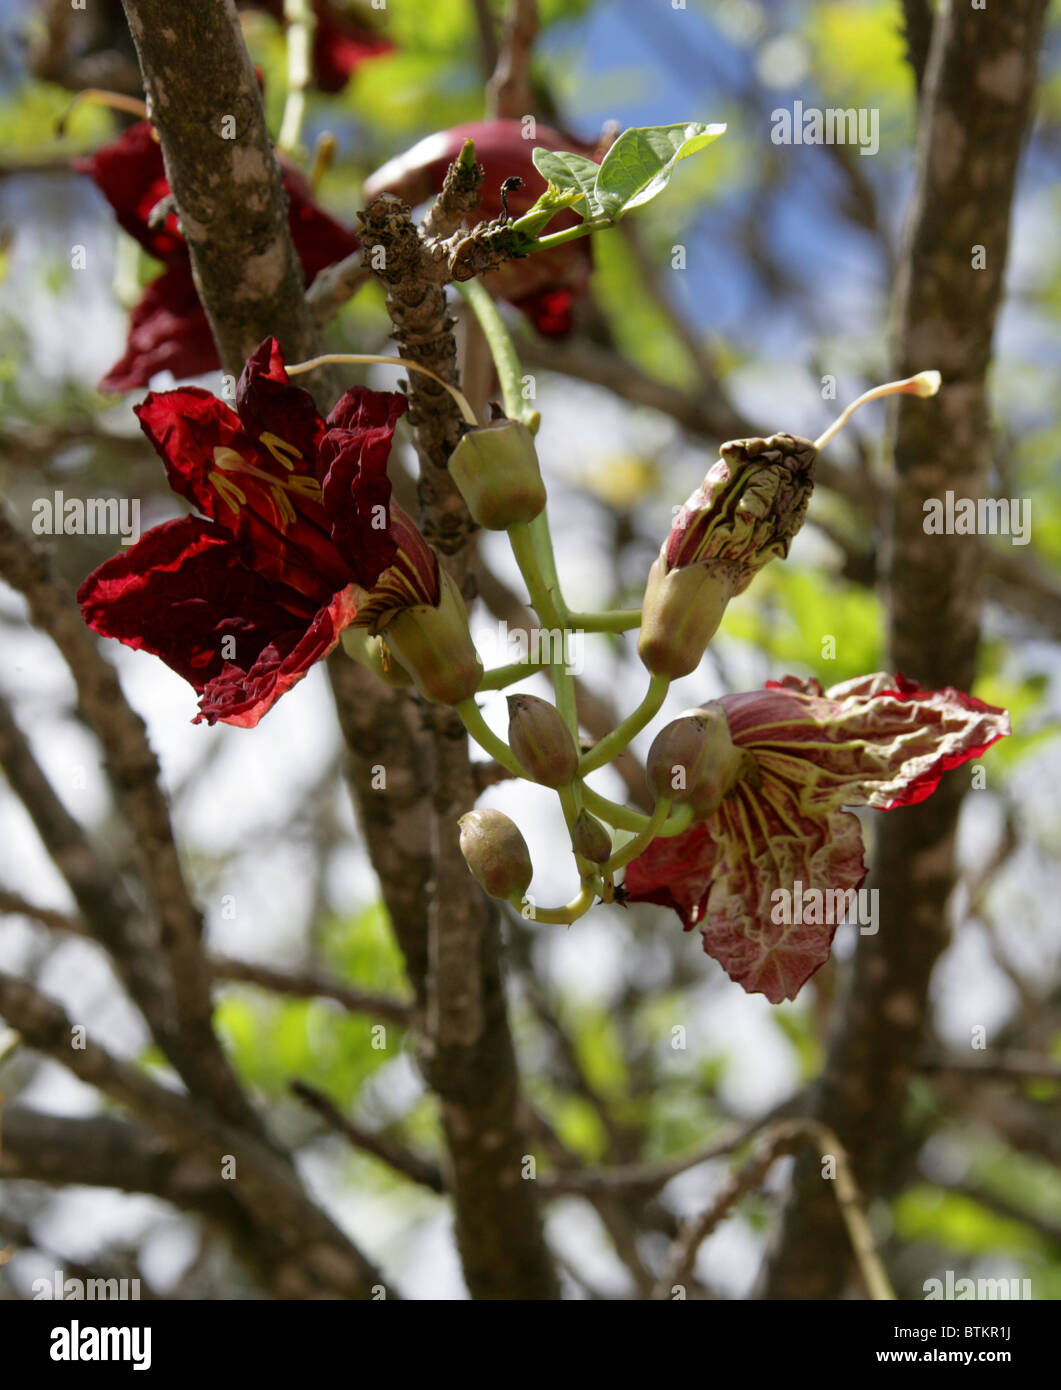 Flowers of the Sausage Tree, Kigelia africana, Bignoniaceae, South Africa Stock Photo